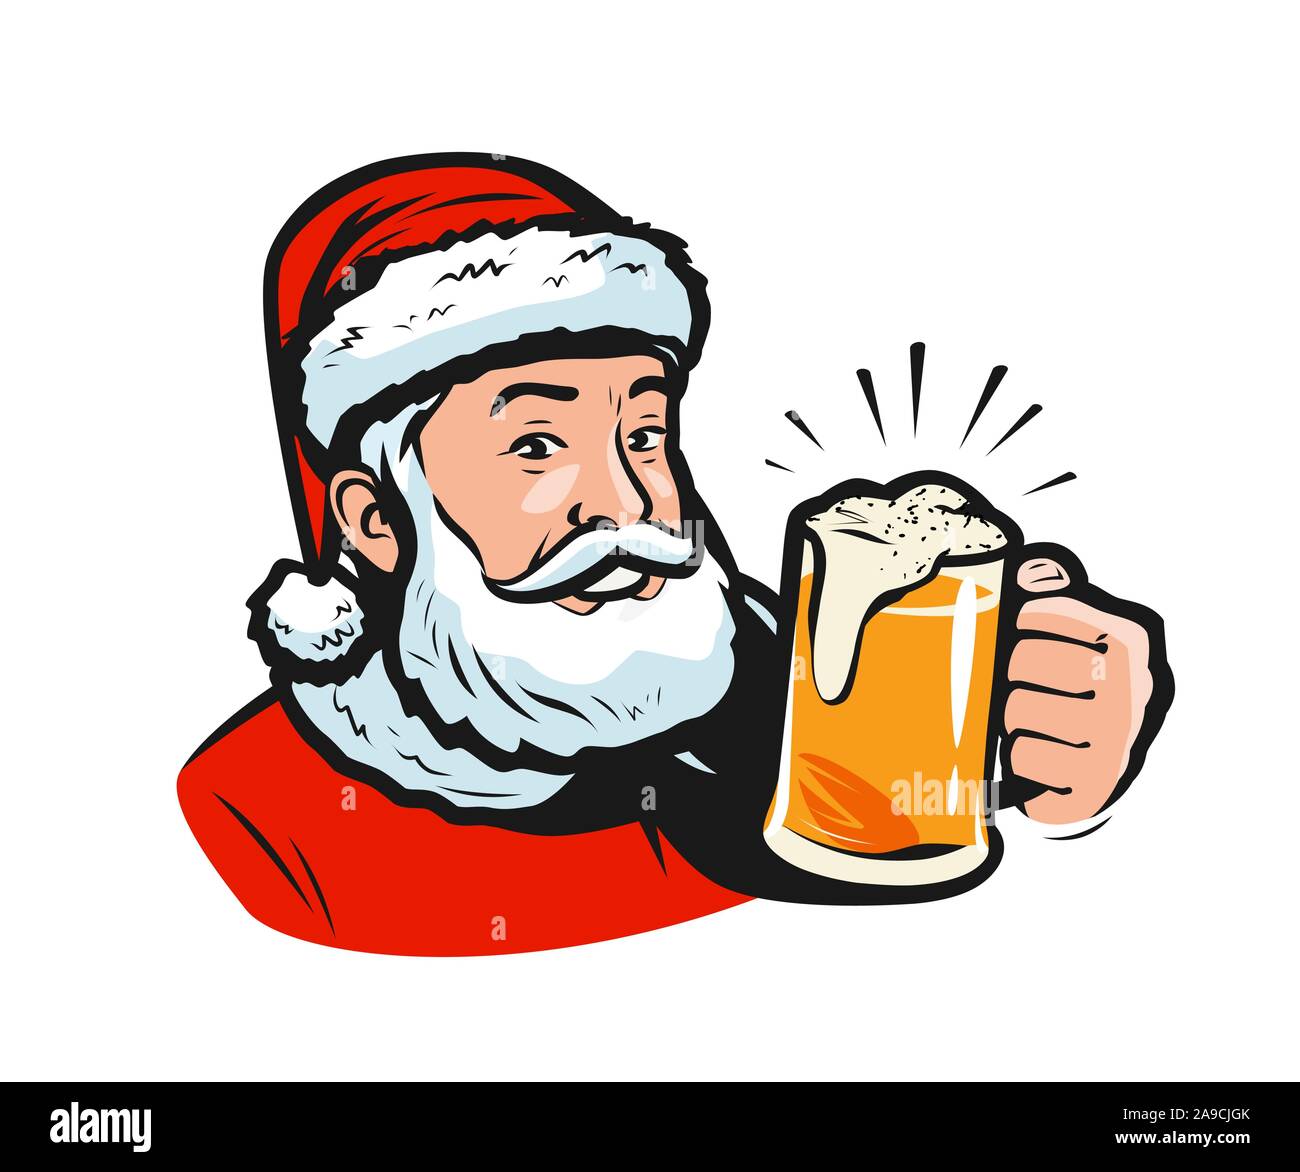 Santa claus with a beer. Christmas vector illustration Stock Vector